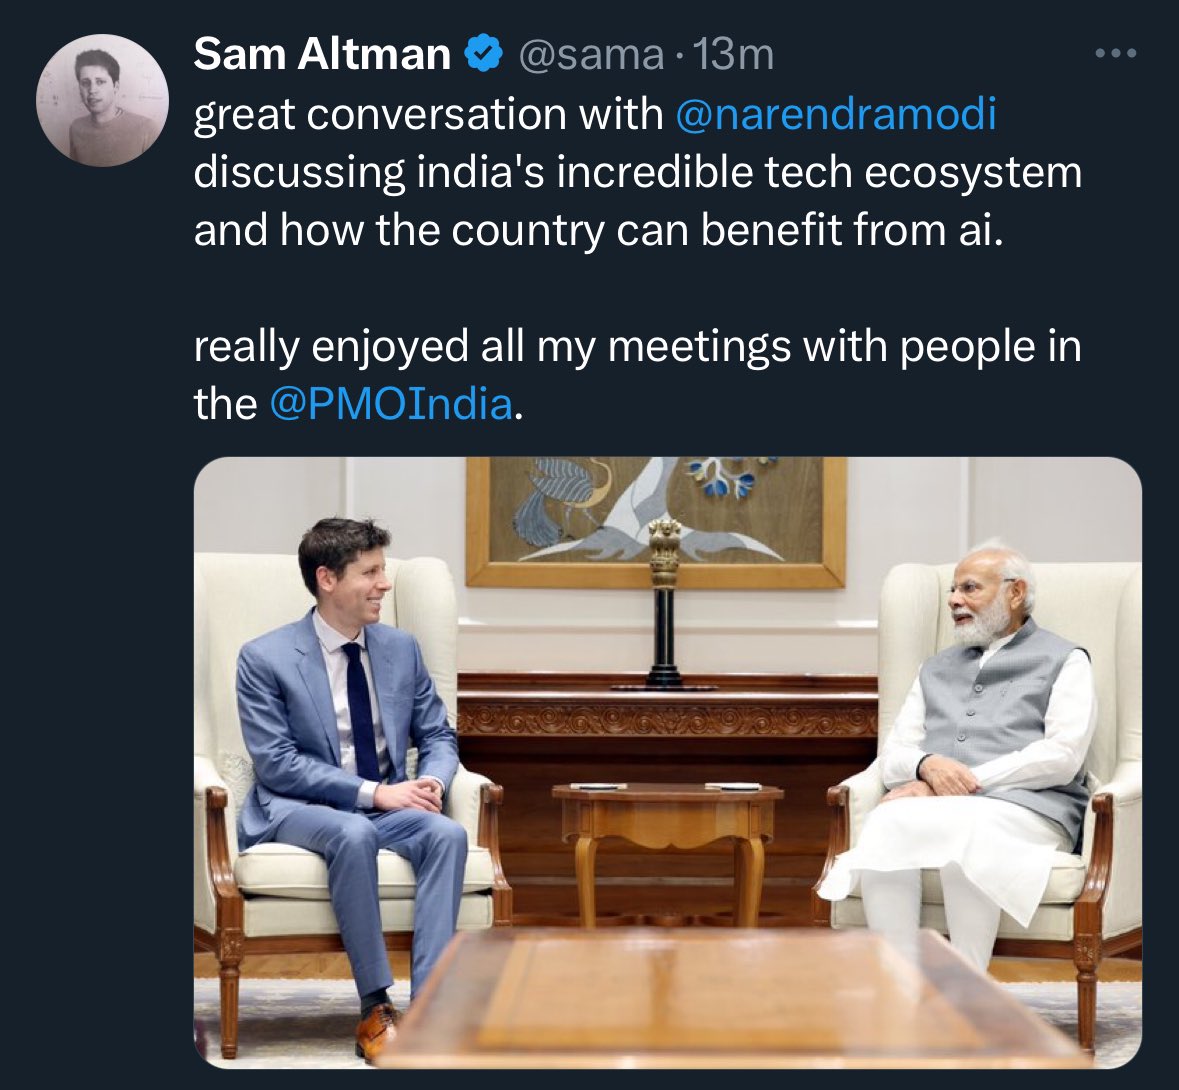 @MoeedNj Meanwhile the Indian PM meets the CEO of OpenAi (chatgpt) 😔